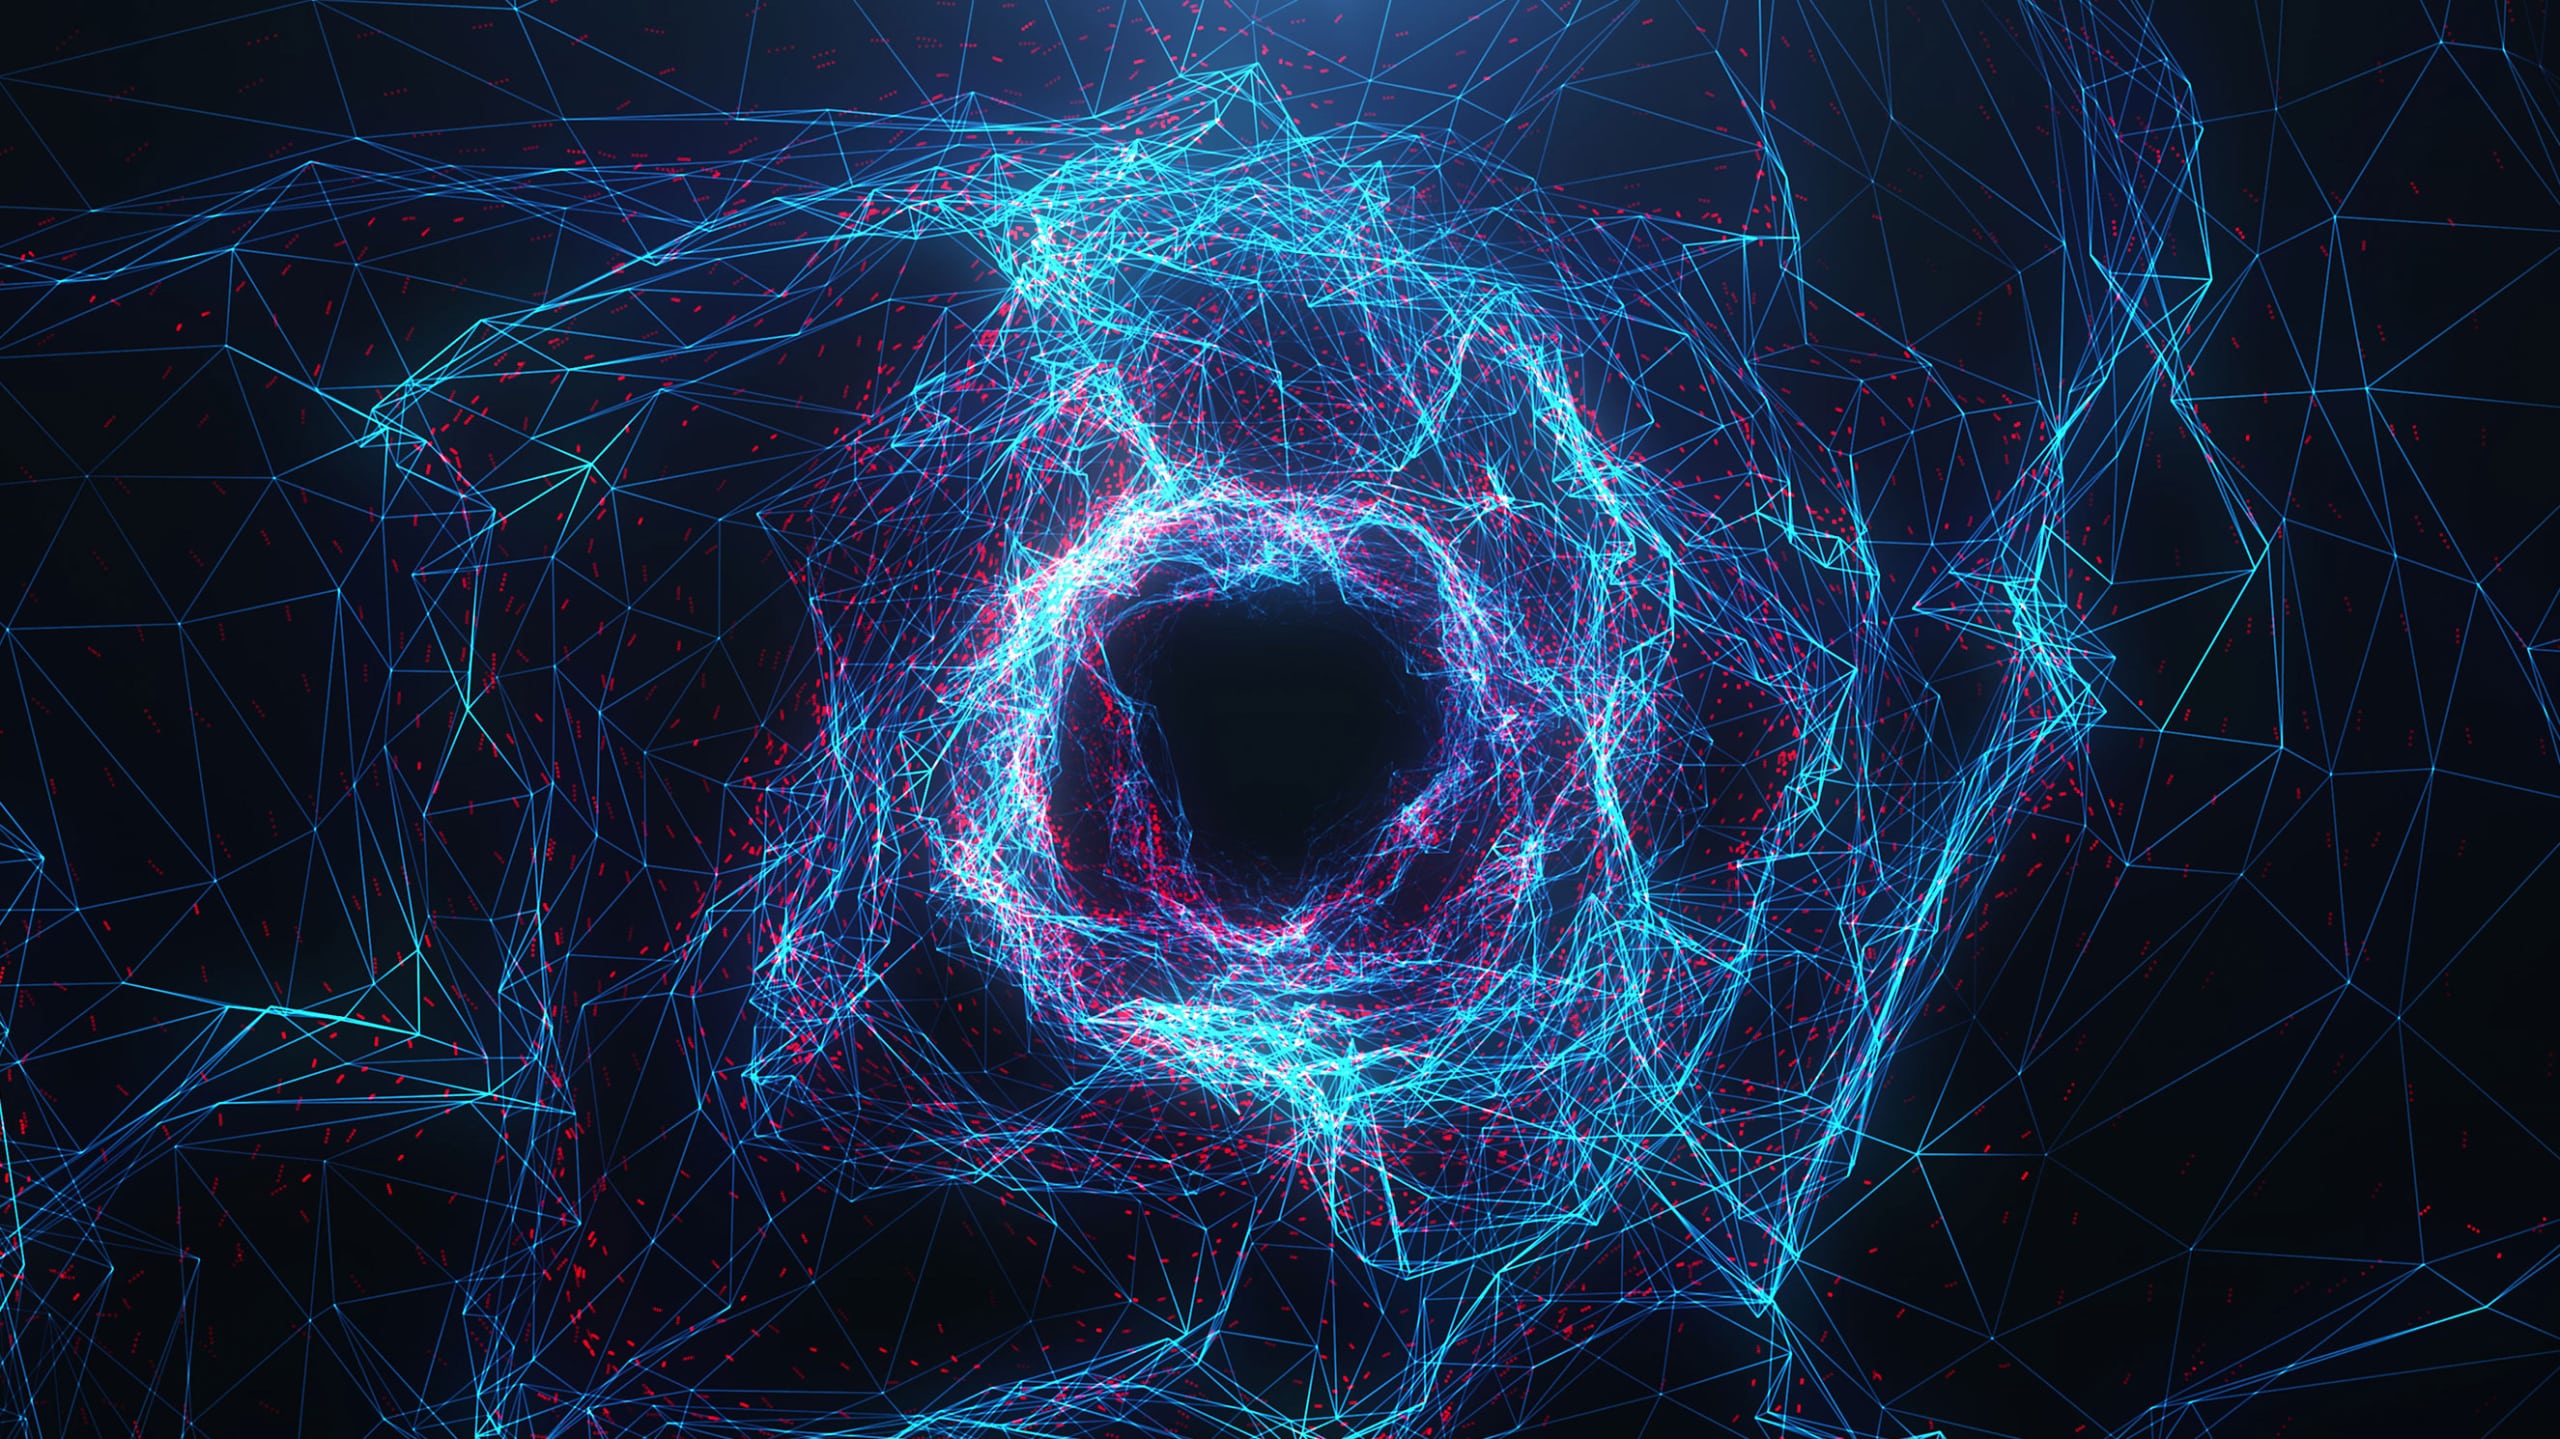 A digital representation of a black hole surrounded by a network of glowing blue and red lines on a dark background, symbolizing how neurodiversity strengthens interconnected data or cosmic activity.